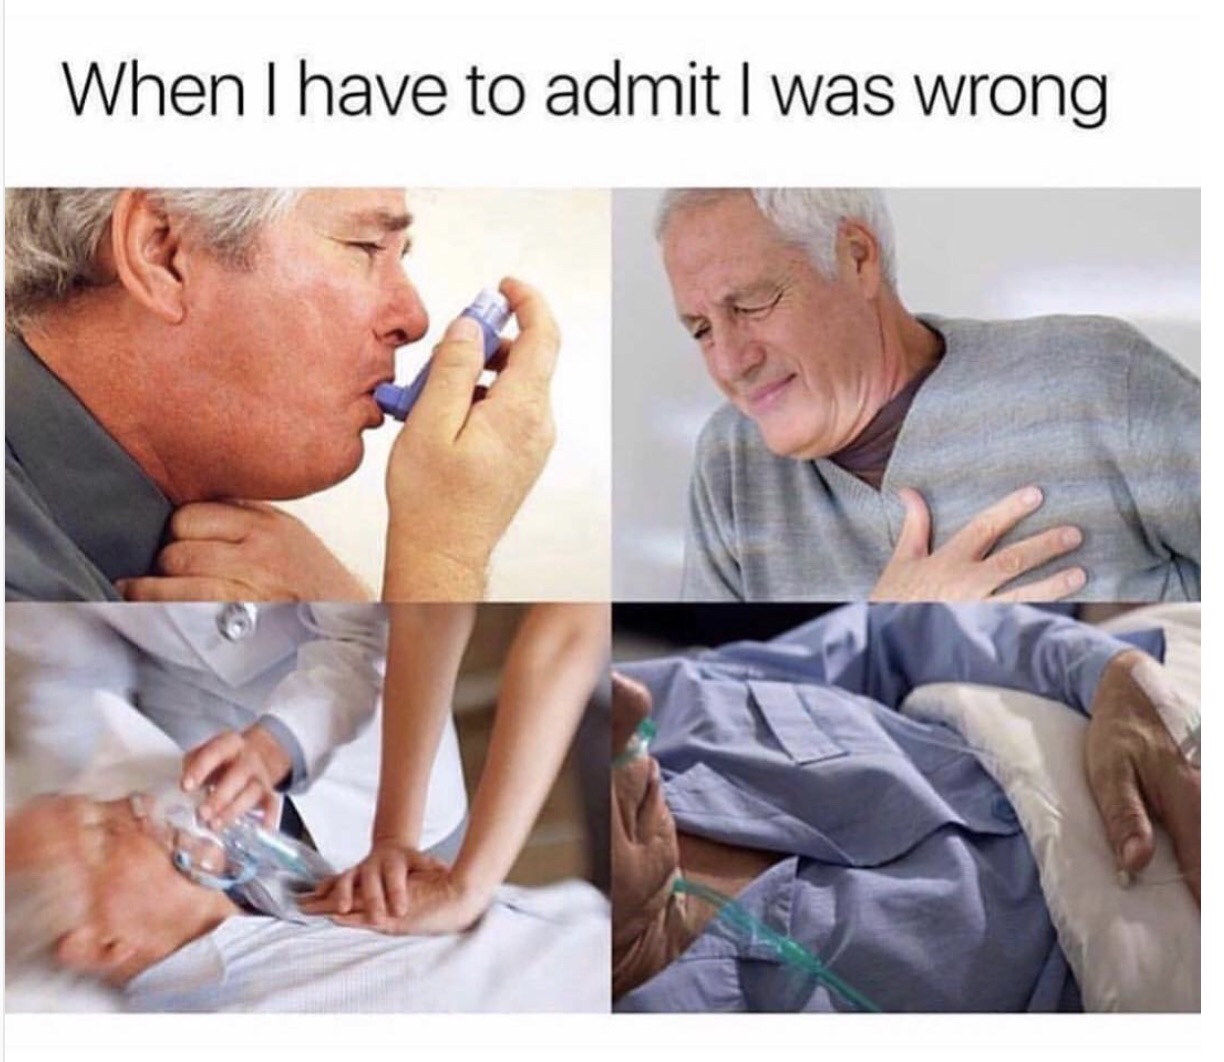 admit wrong meme - When I have to admit I was wrong